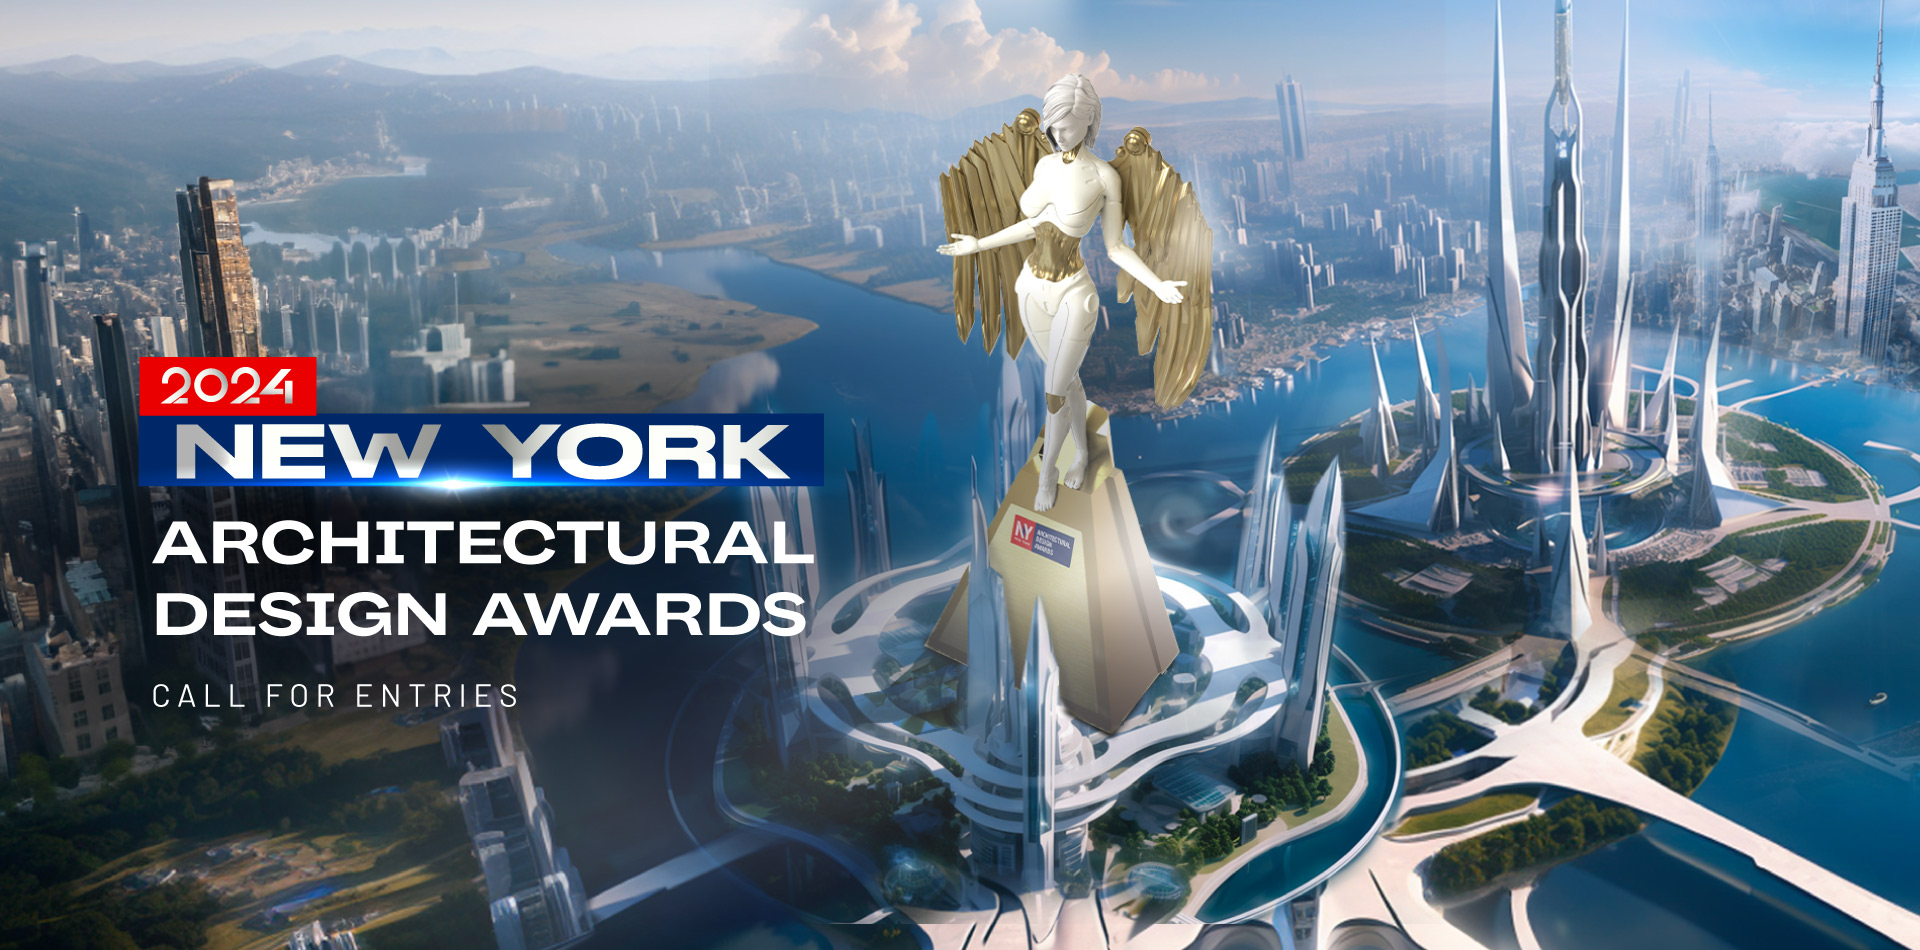 2024 NY Architectural Design Awards Call for Entries